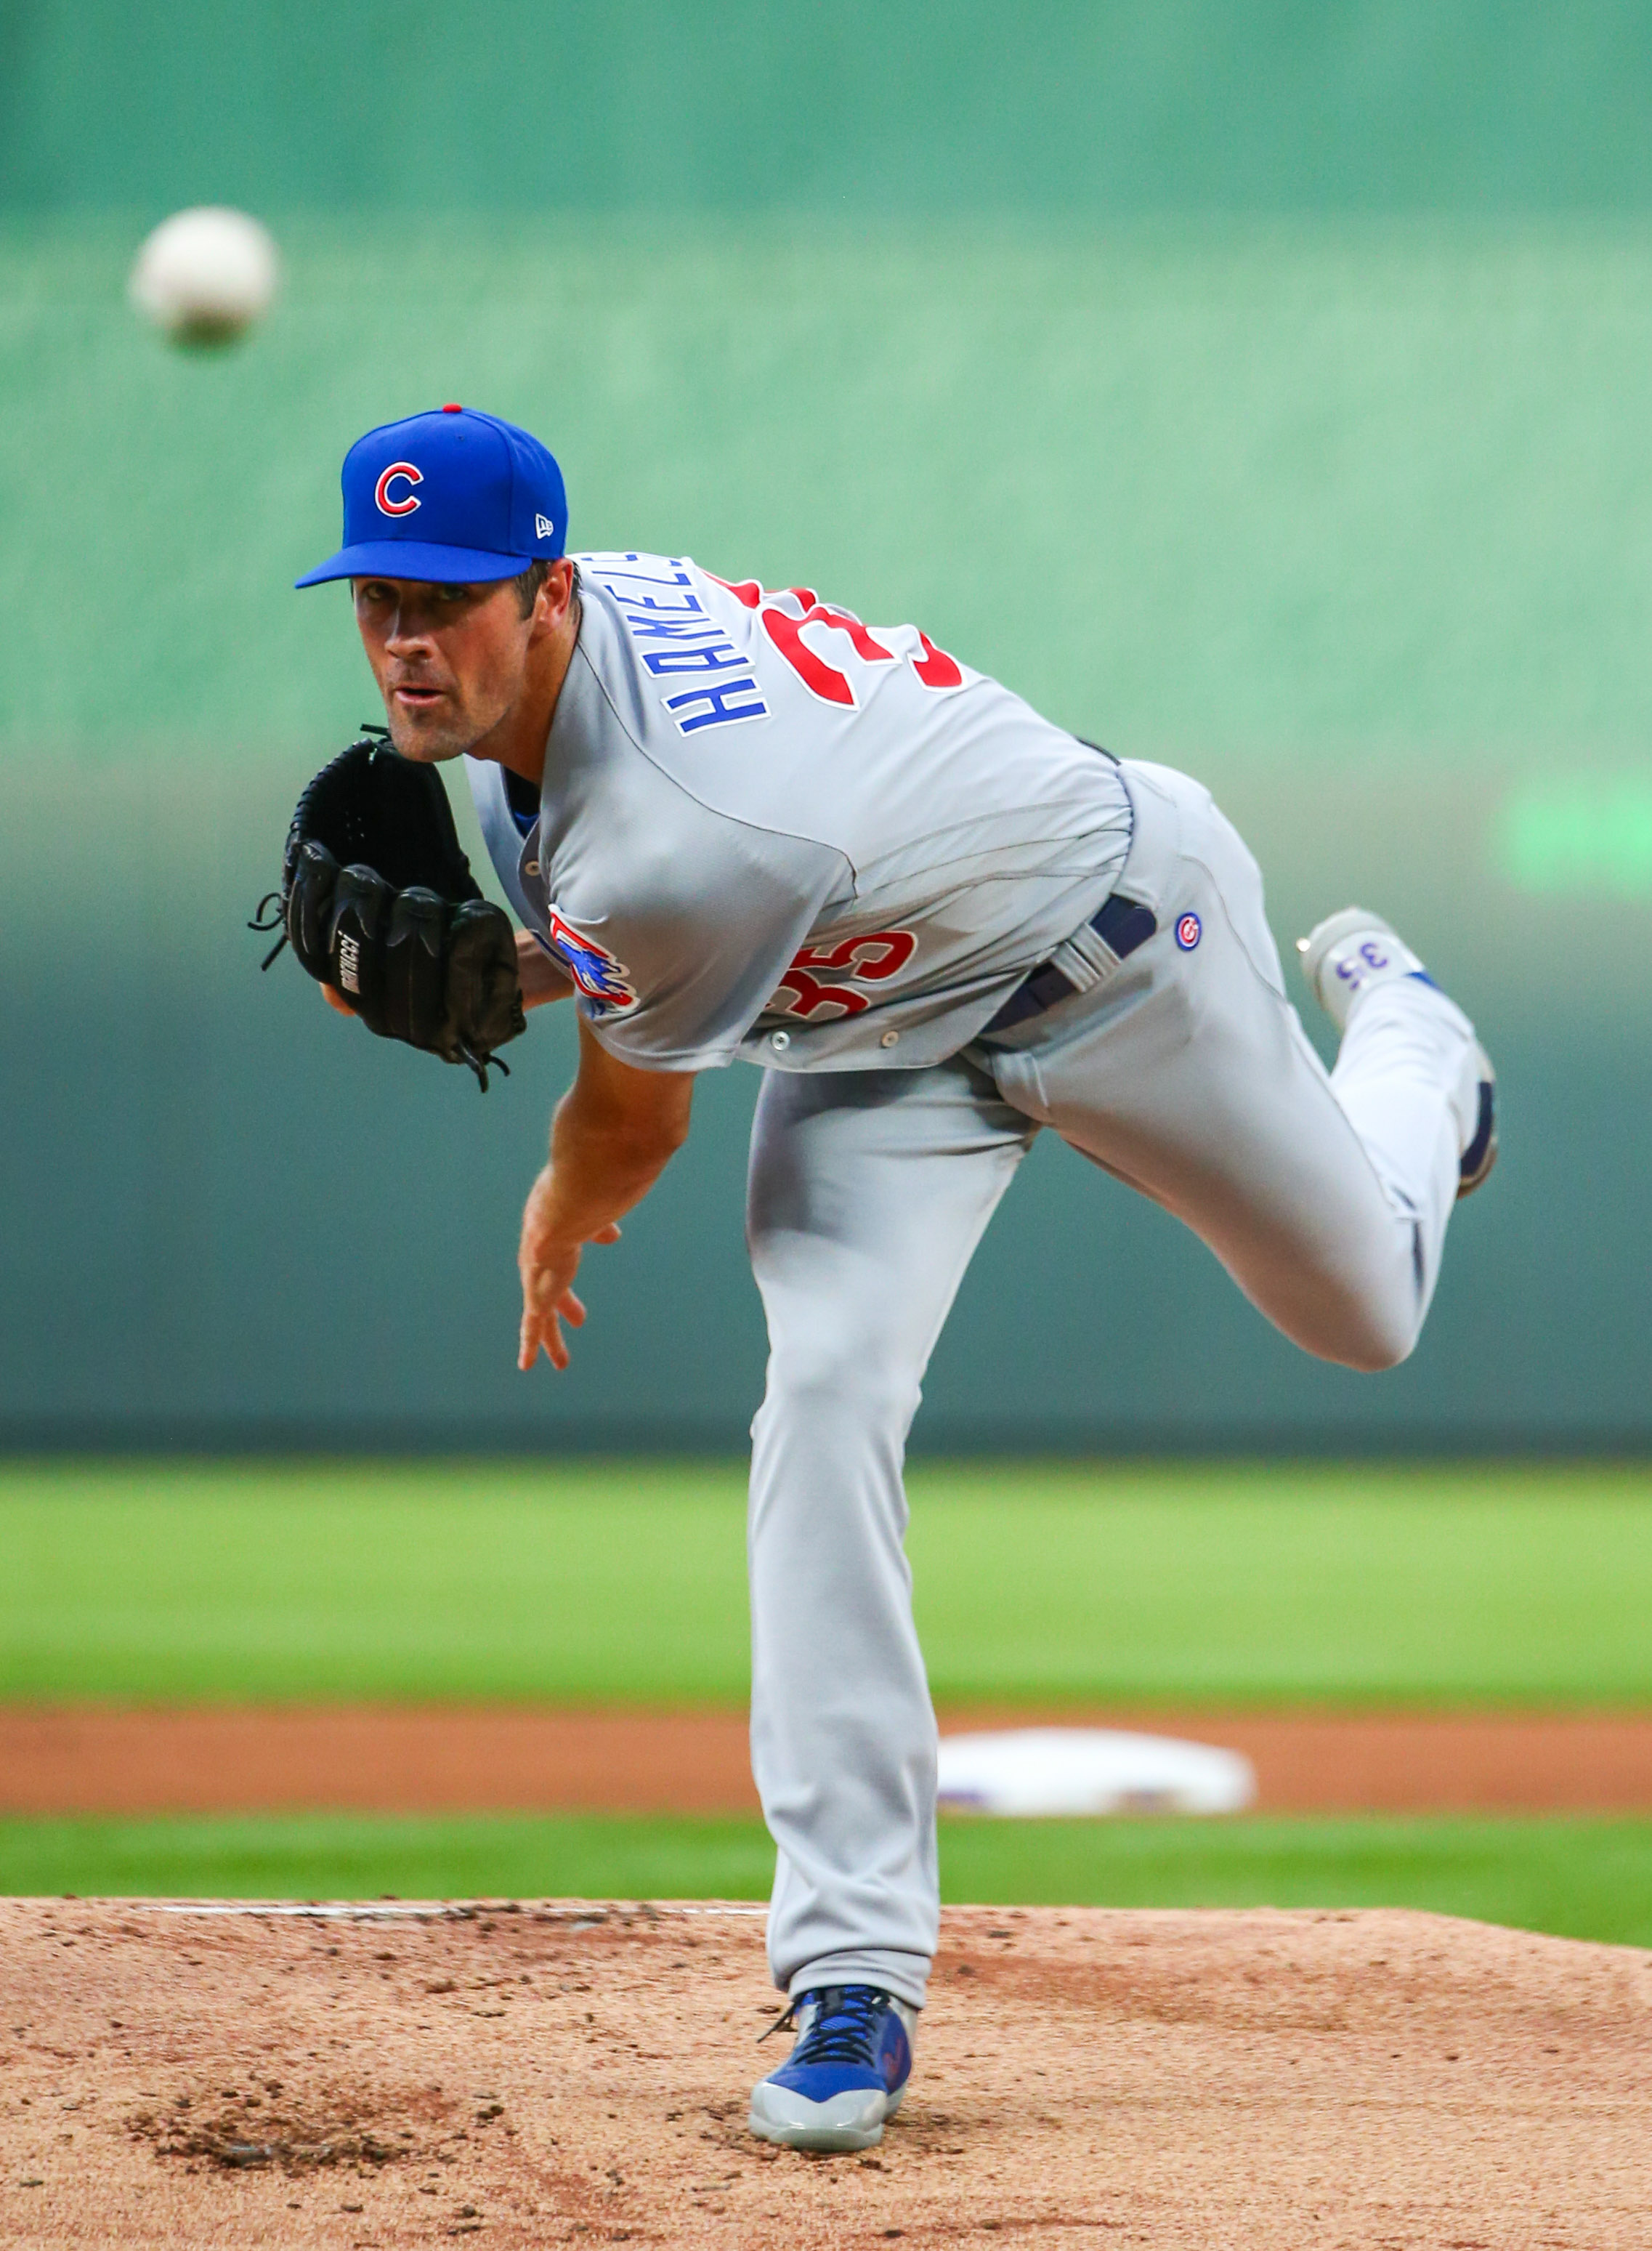 OLD MAN COLE HAMELS BRINGS PHILLIES STUFF TO THE CUBS!